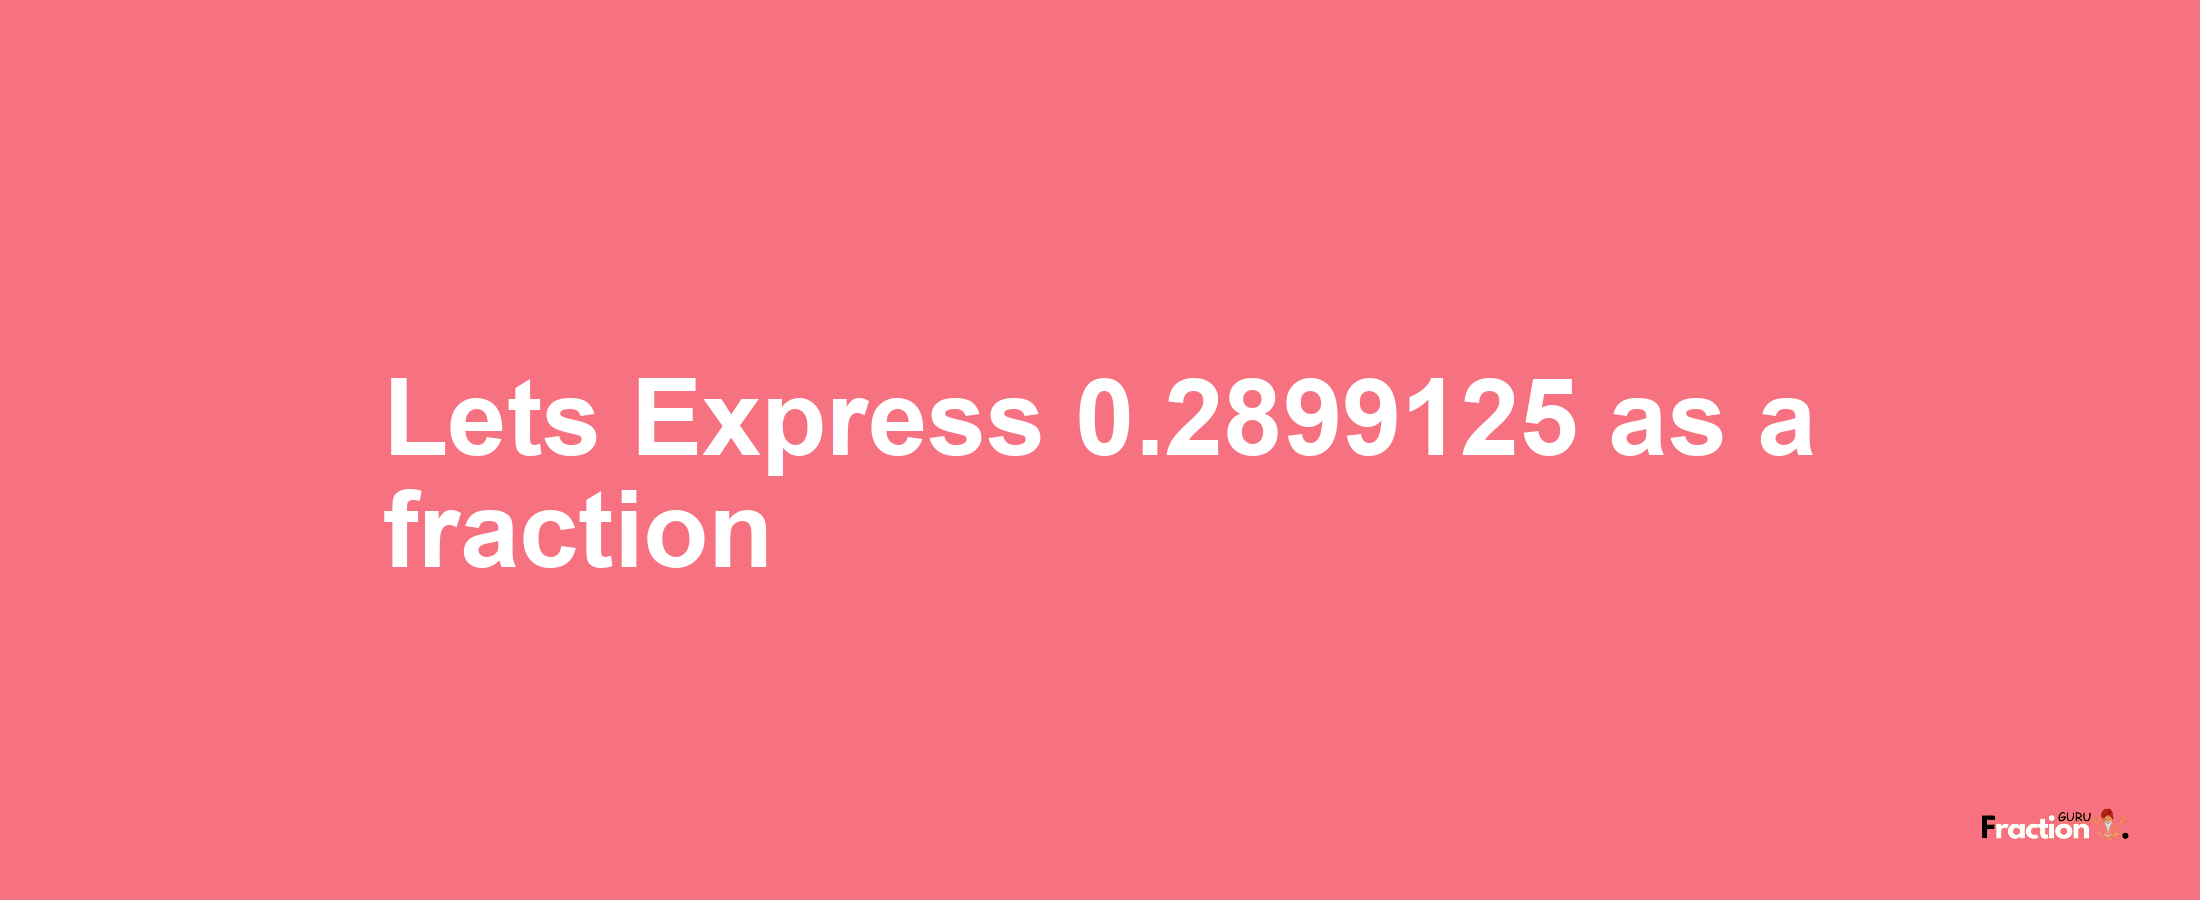 Lets Express 0.2899125 as afraction